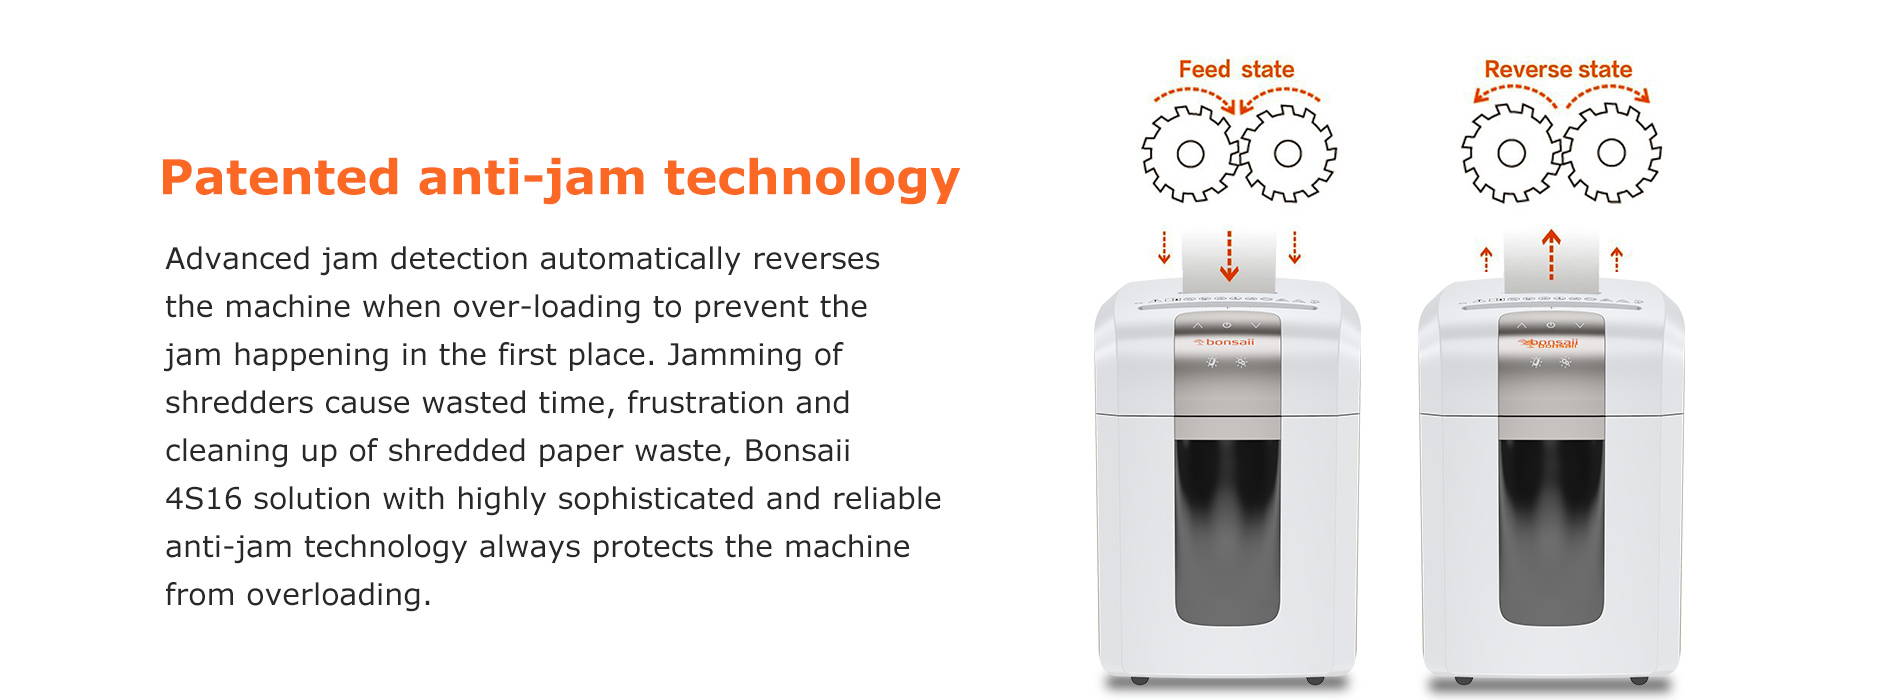 Patented anti-jam technology Advanced jam detection automatically reverses the machine when over-loading to prevent the jam happening in the first place. Jamming of shredders cause wasted time, frustration and cleaning up of shredded paper waste, Bonsaii 4S16 solution with highly sophisticated and reliable anti-jam technology always protects the machine from overloading.